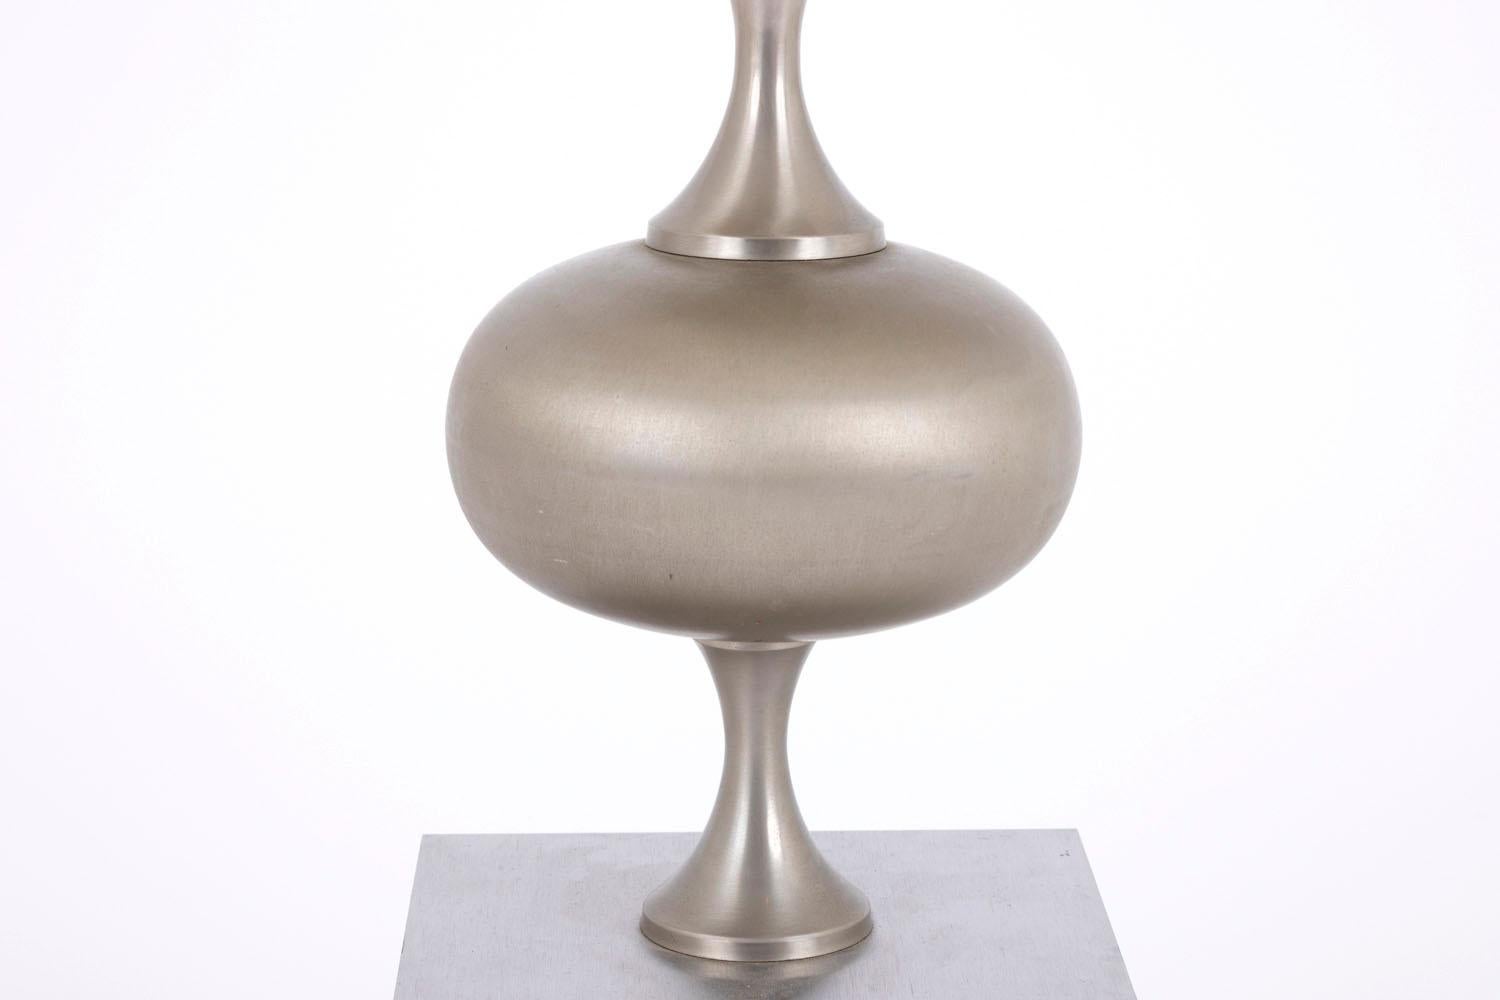 European Lamp in Brushed Stainless Steel, 1970s